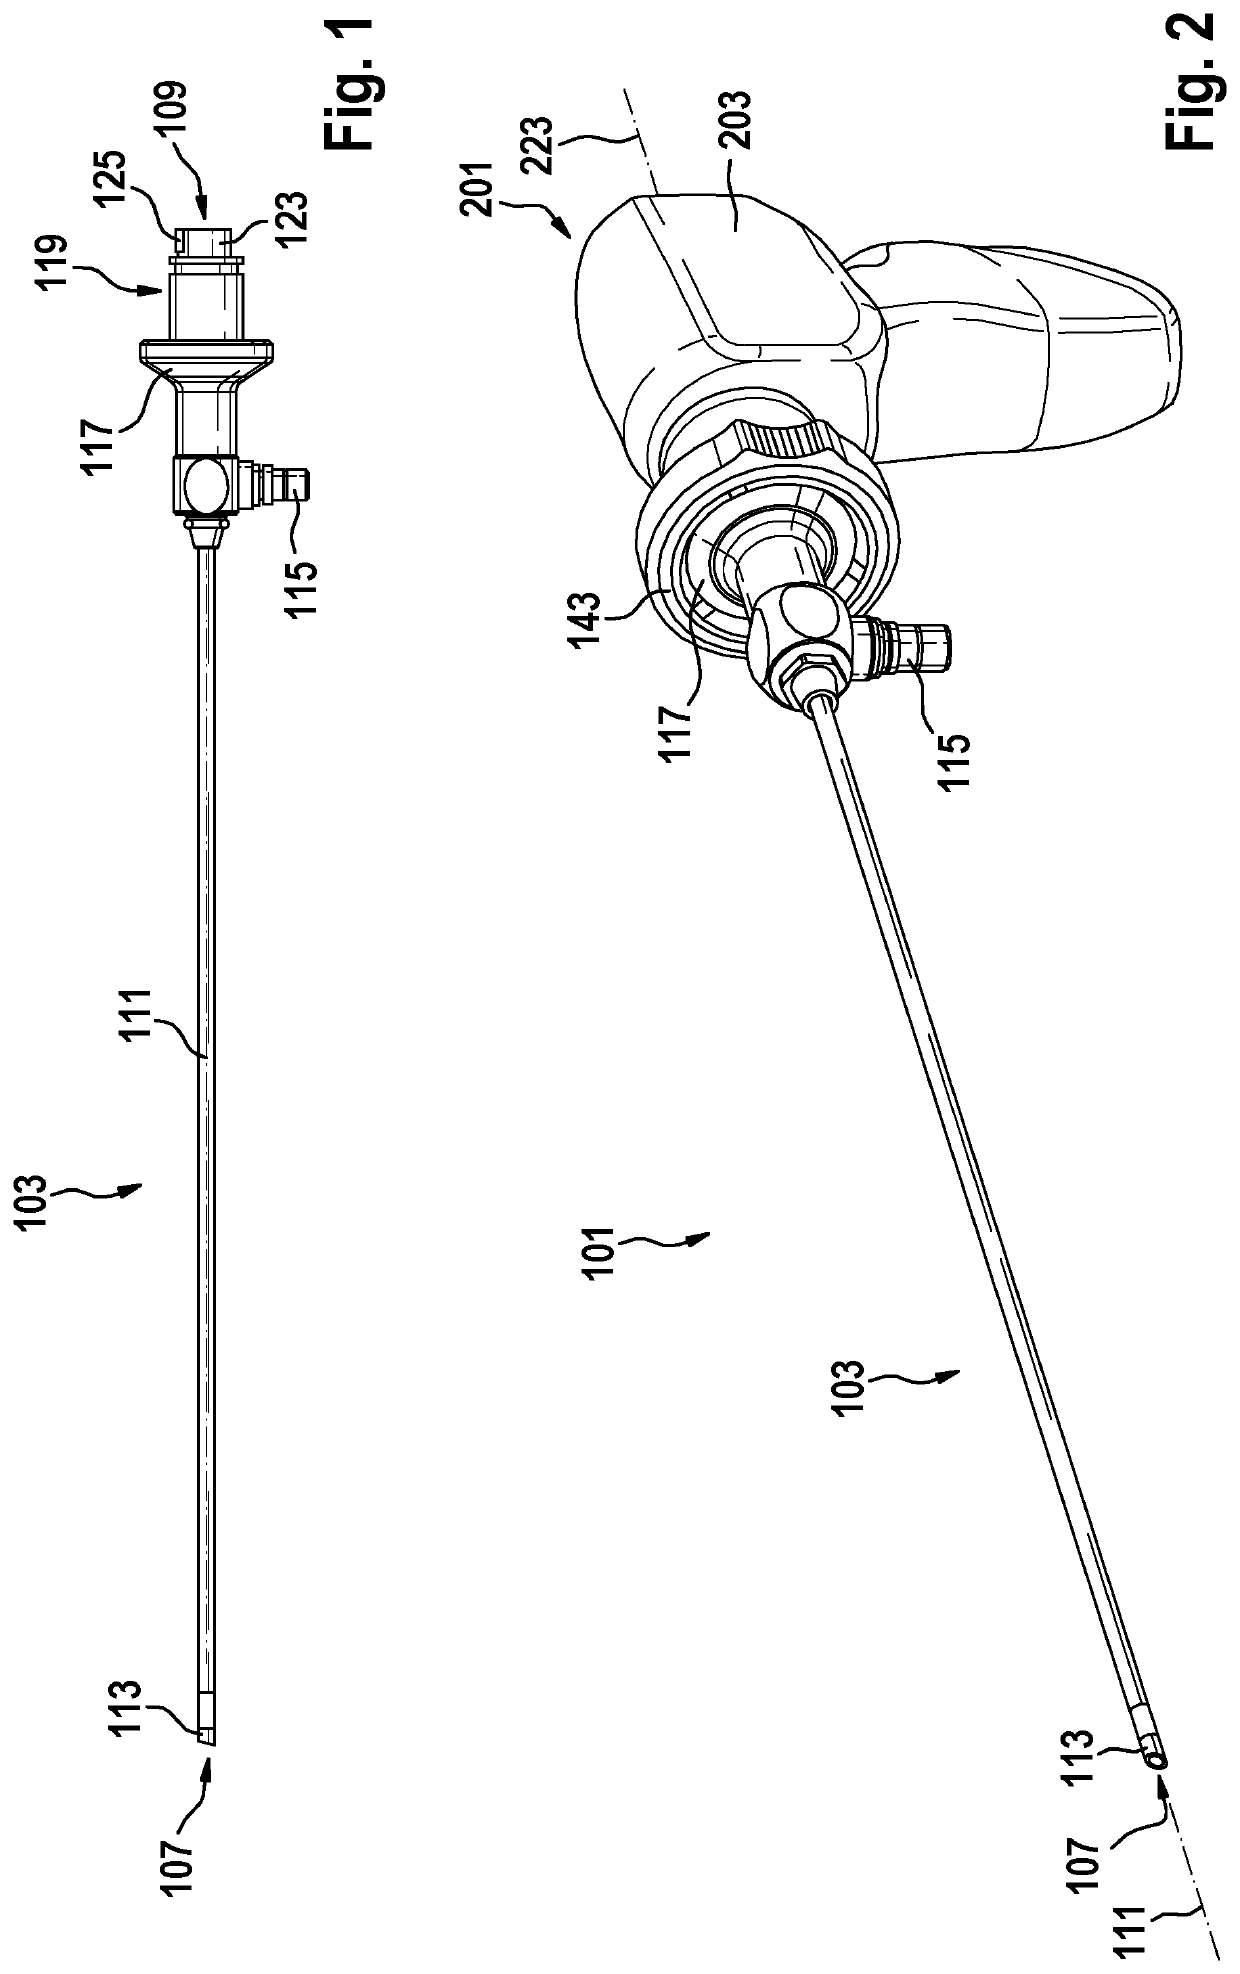 Video Endoscope and Handle, Including Driven Rotation Limitation, For Video Endoscope